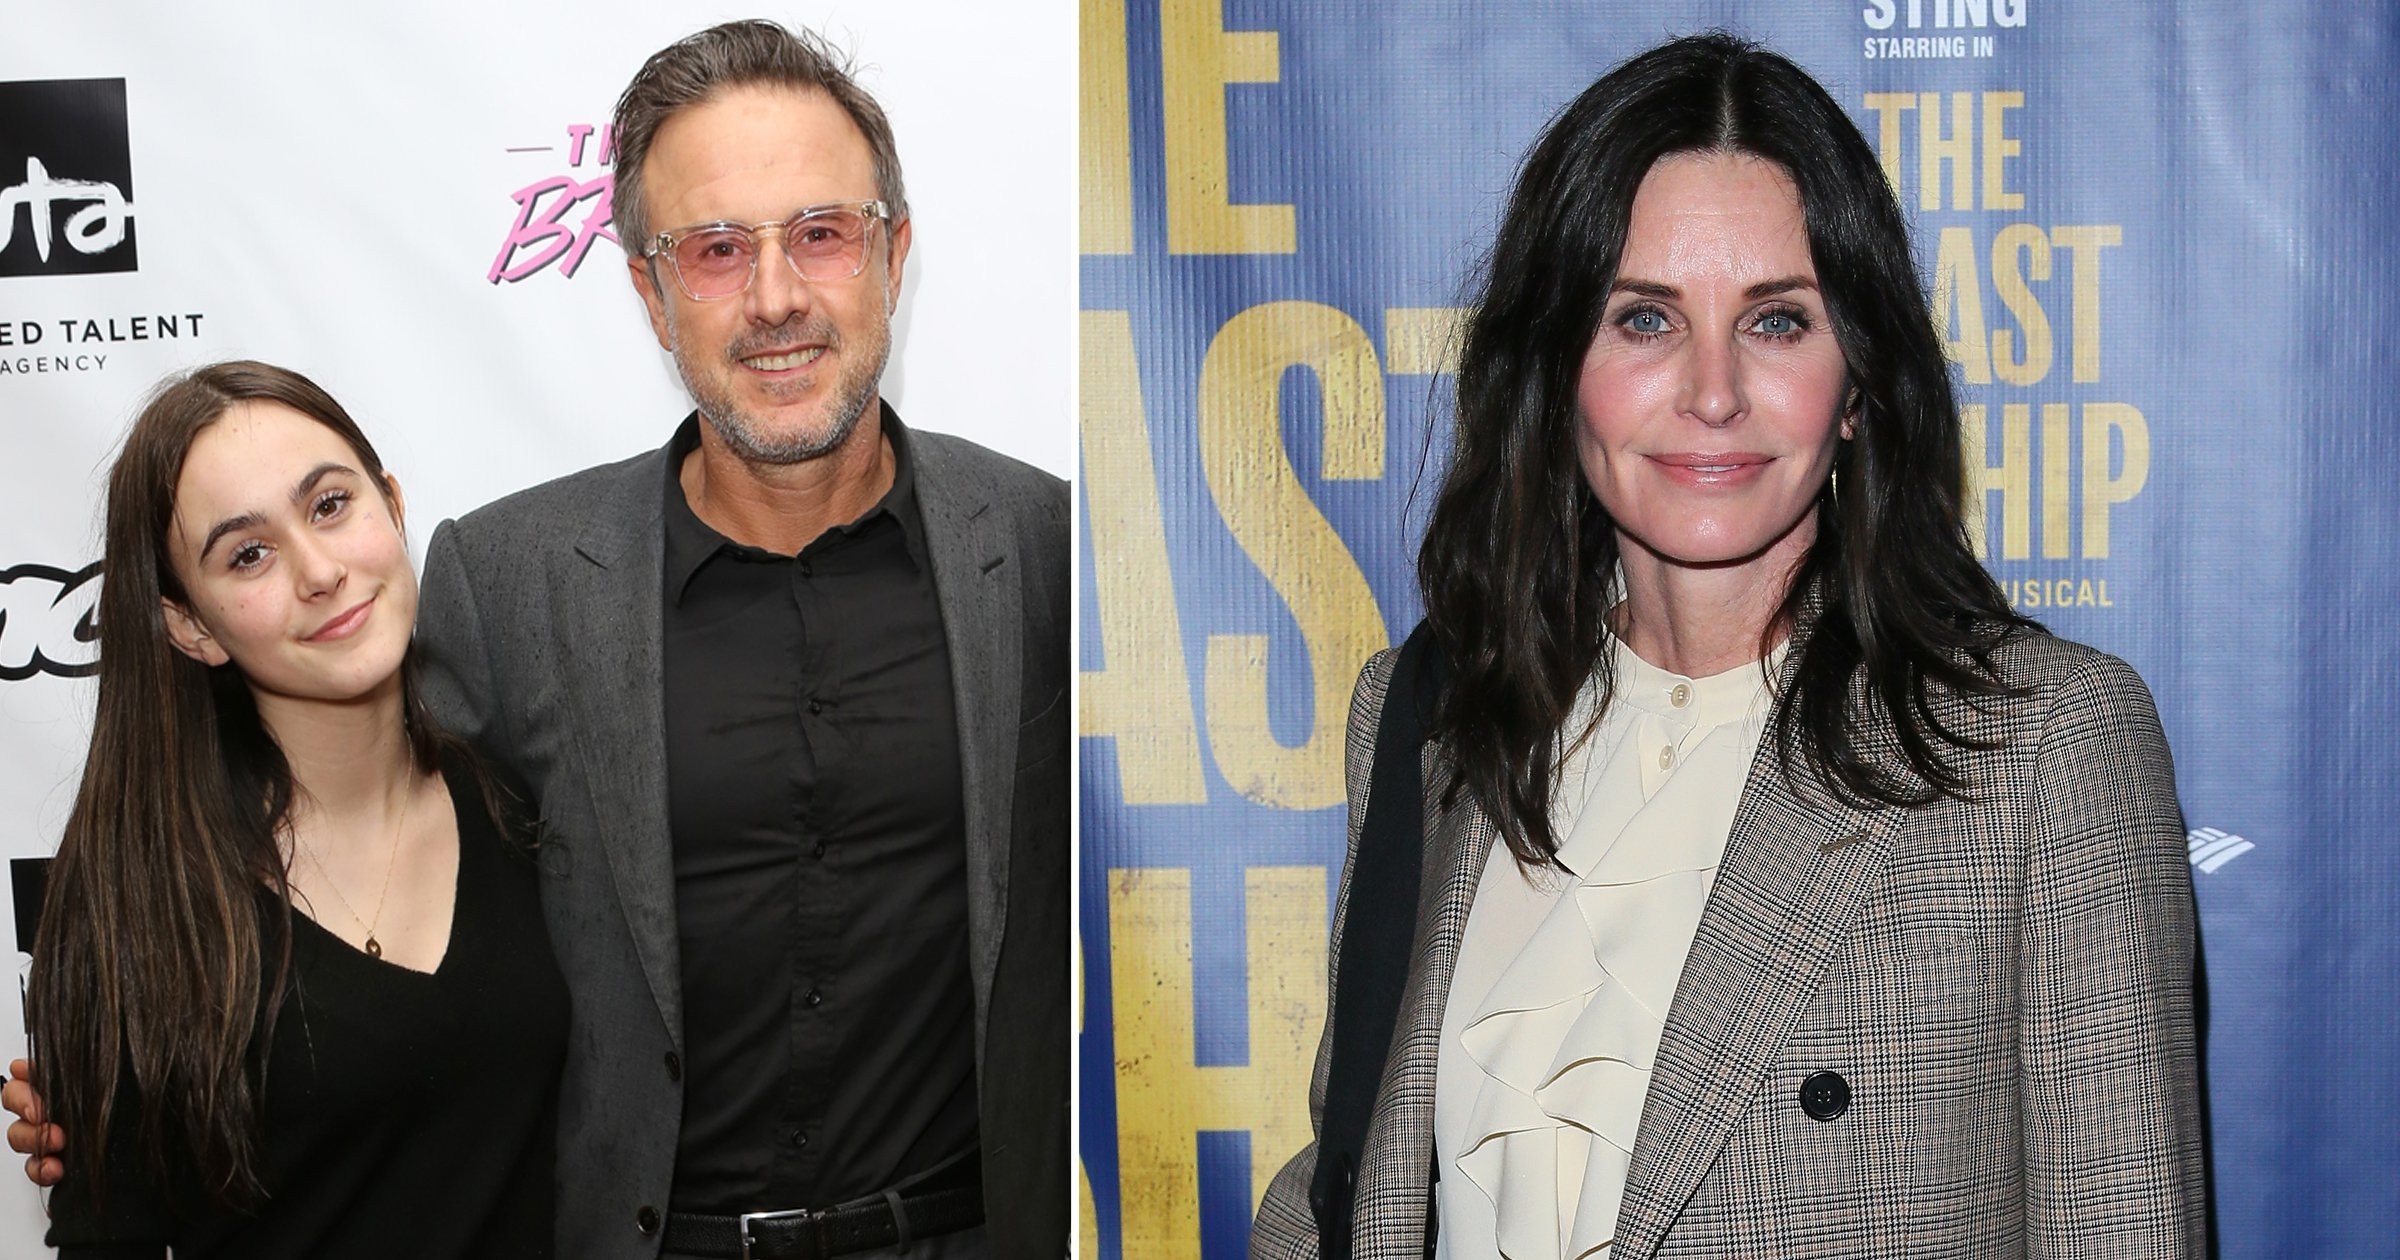 David Arquette apologises to daughter Coco over divorcing ex Courteney Cox: ‘It’s so difficult’